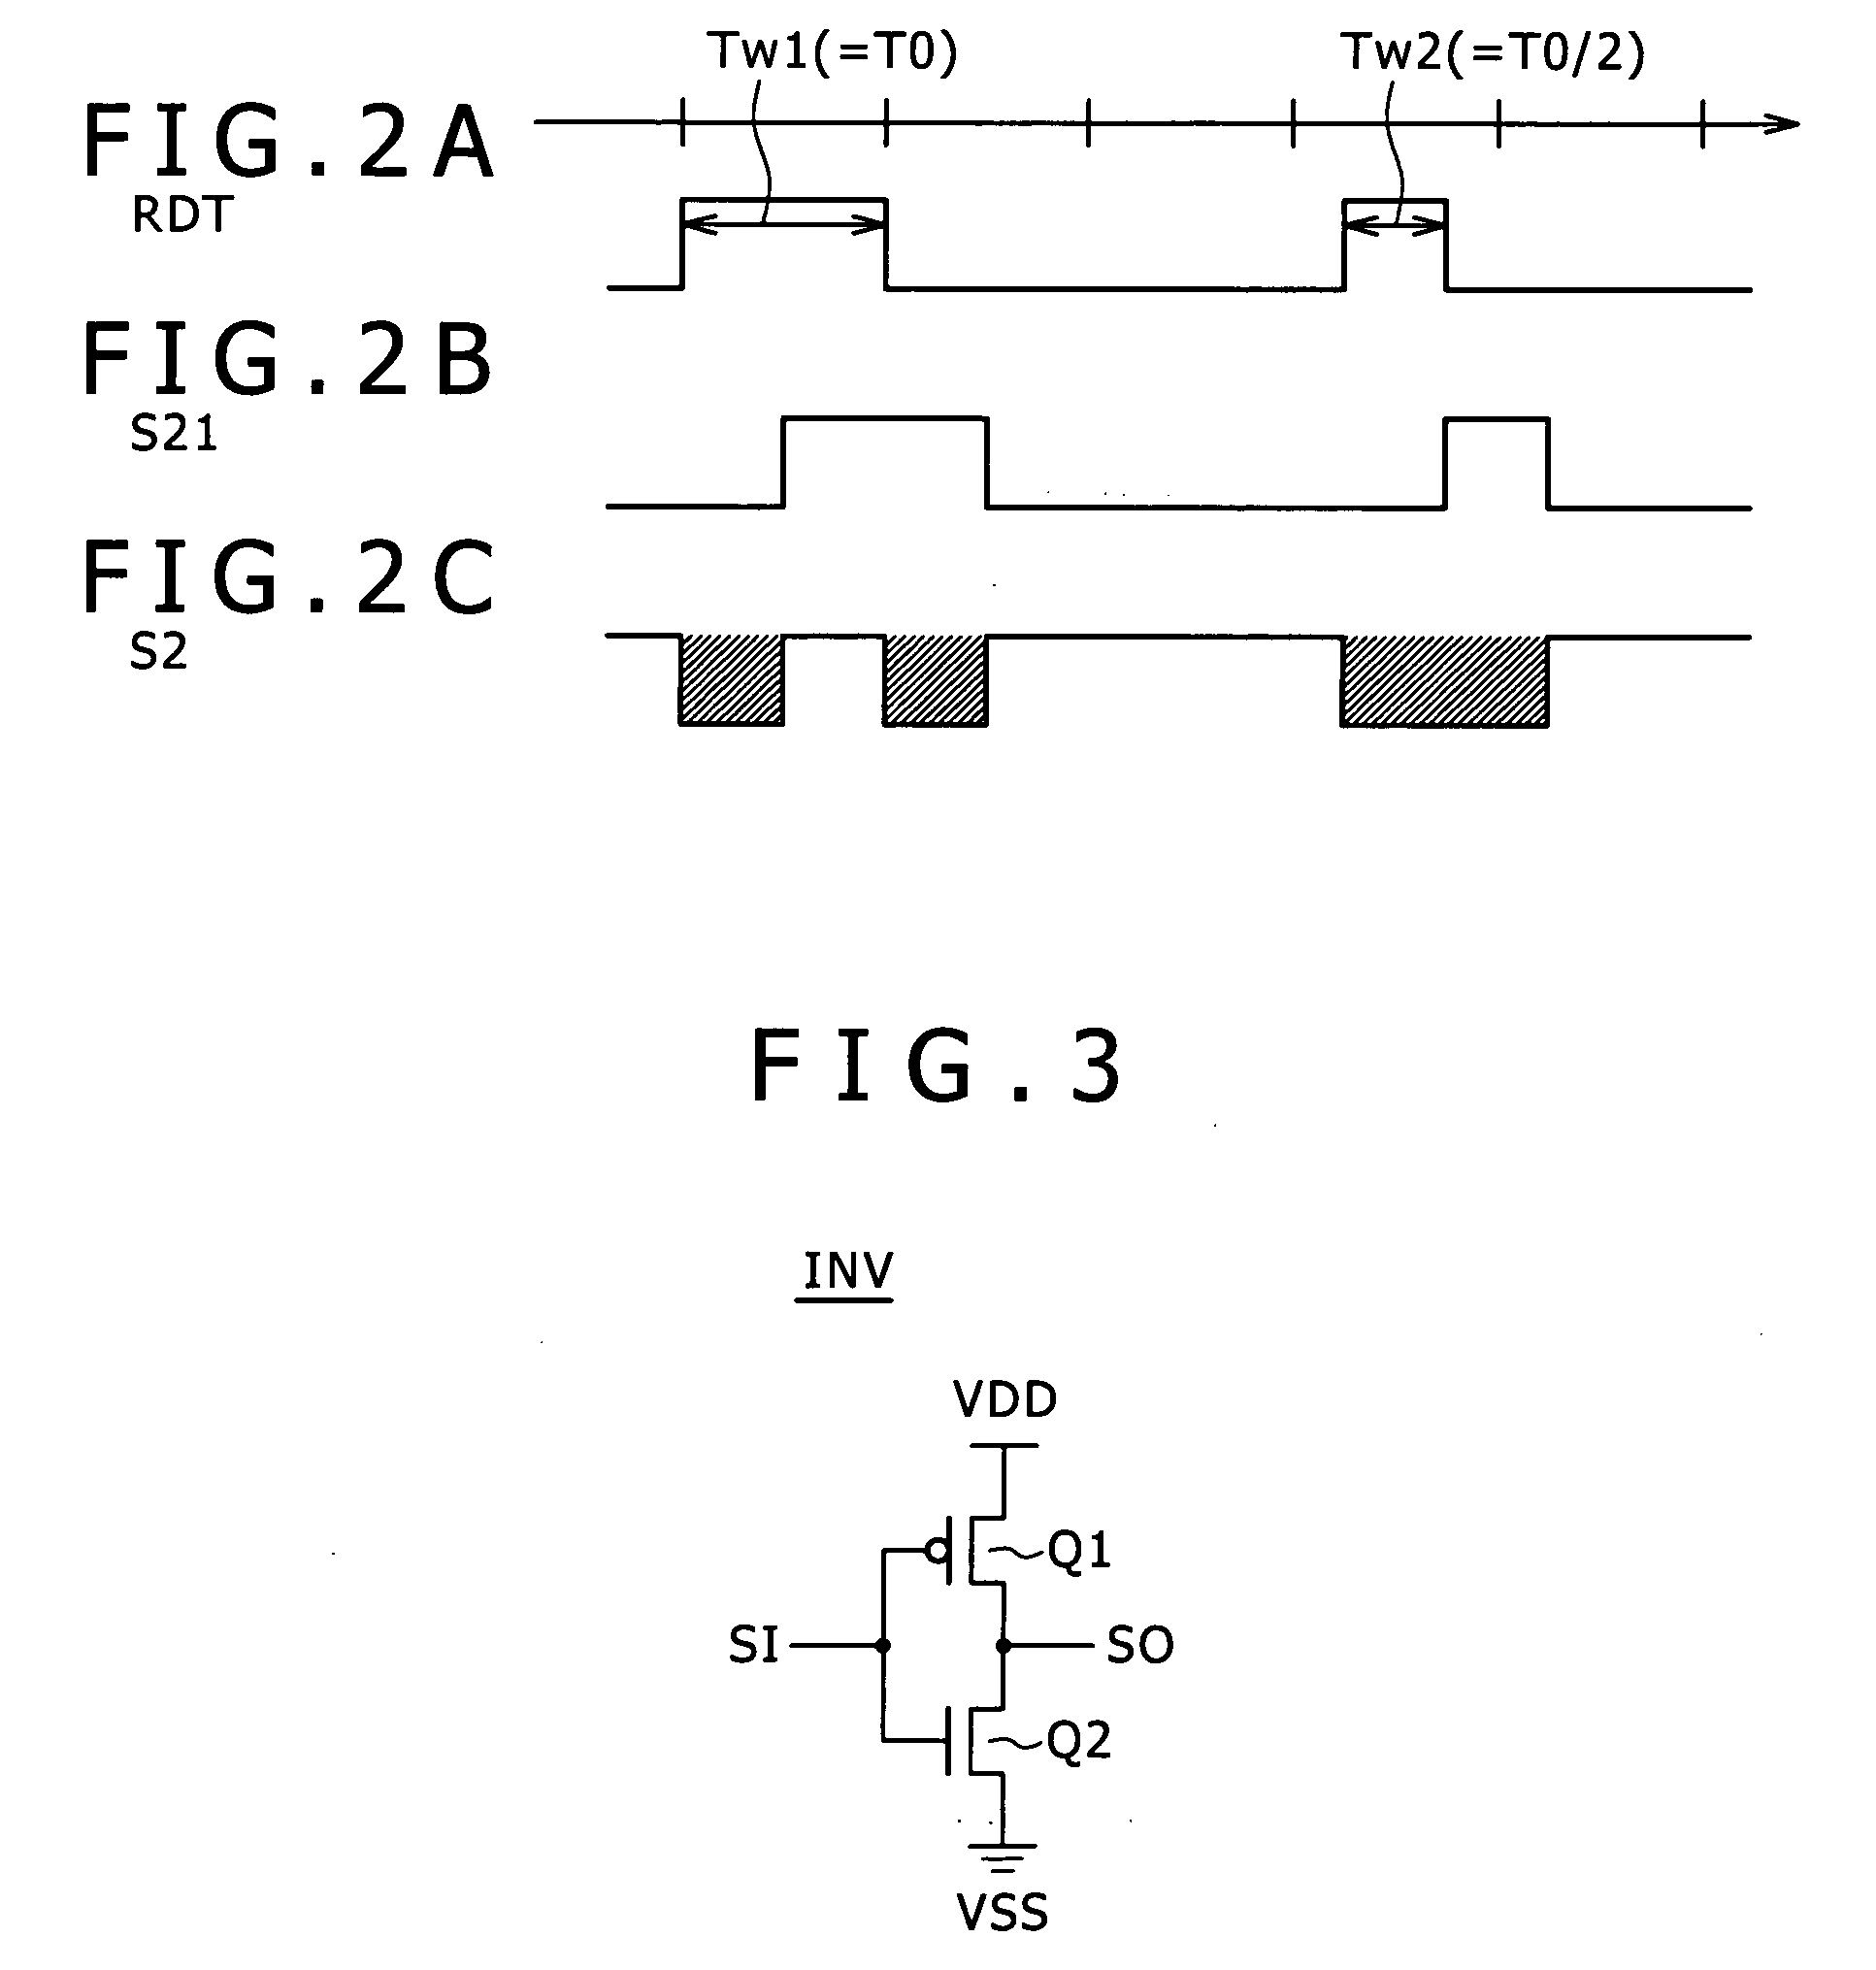 Synchronous oscillator, clock recovery apparatus, clock distribution circuit, and multi-mode injection circuit